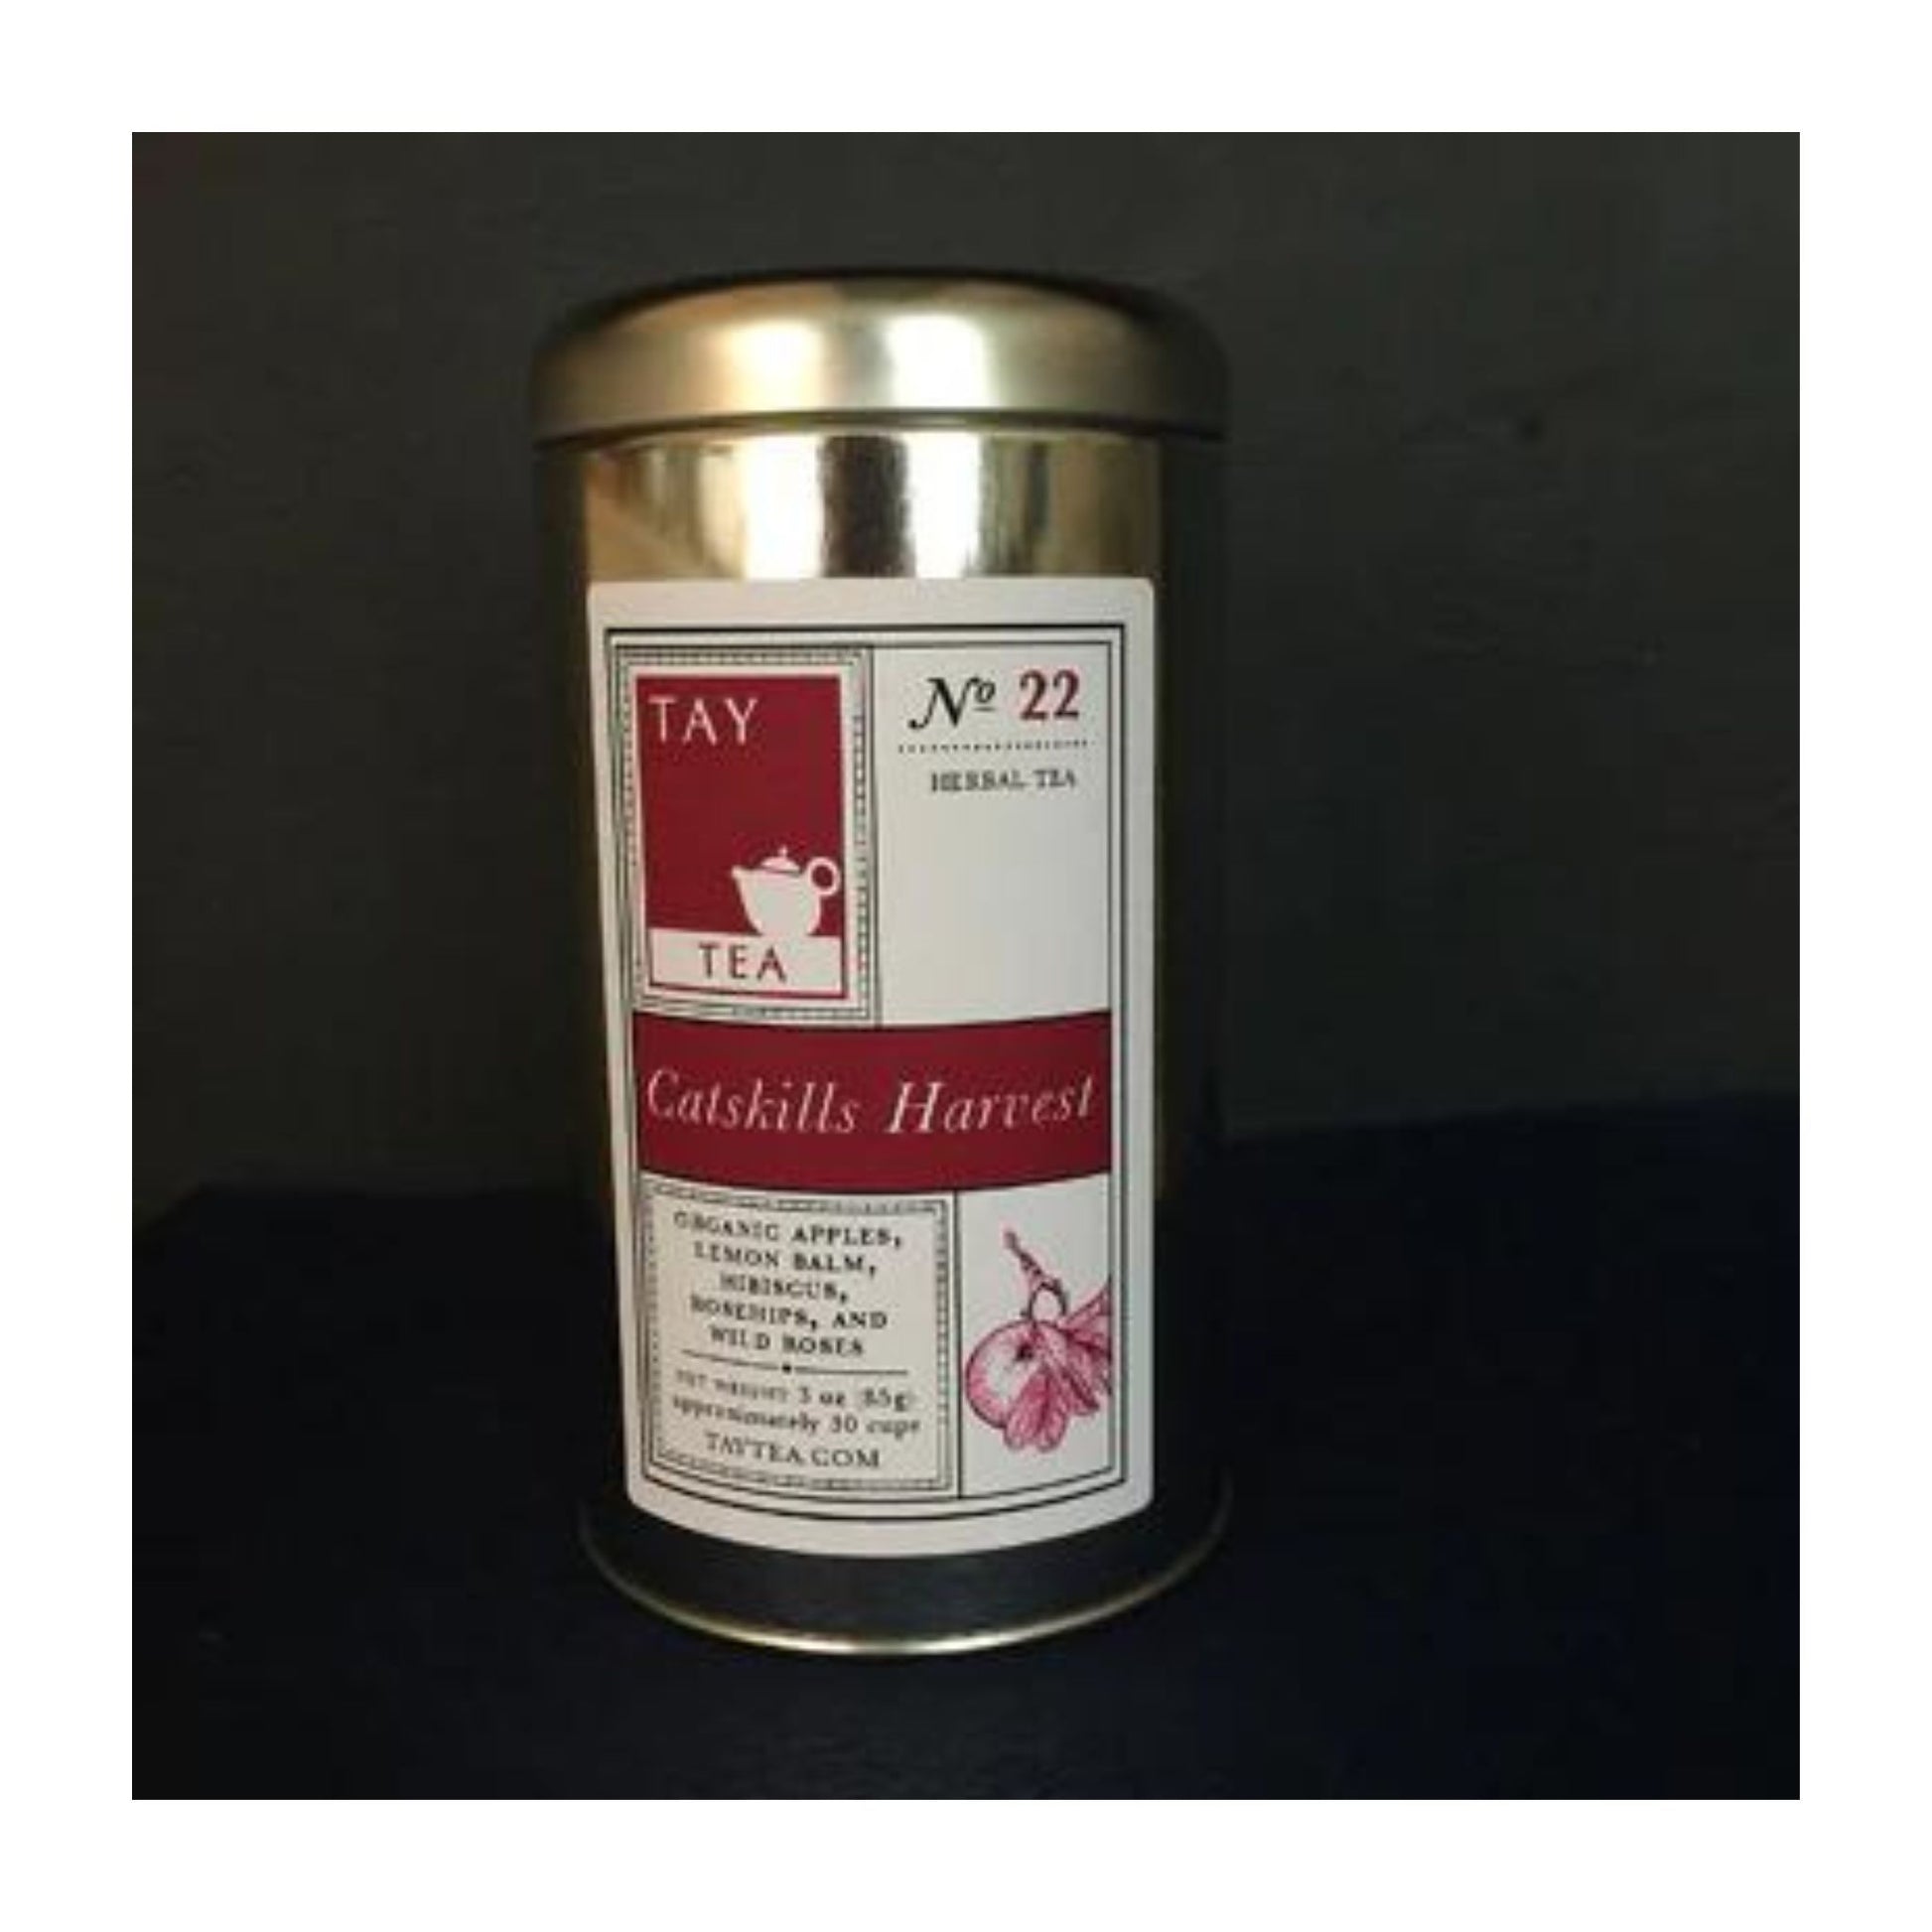 Catskills Harvest Wellness Tea from Tay Tea is an organic caffeine-free herbal blend, inspired by the bounty of the Catskill Mountains, consists of apple, sumac, rosehips, hibiscus, lemon verbena, and wild roses. 4 oz of loose tea is packaged in a resealable tin.